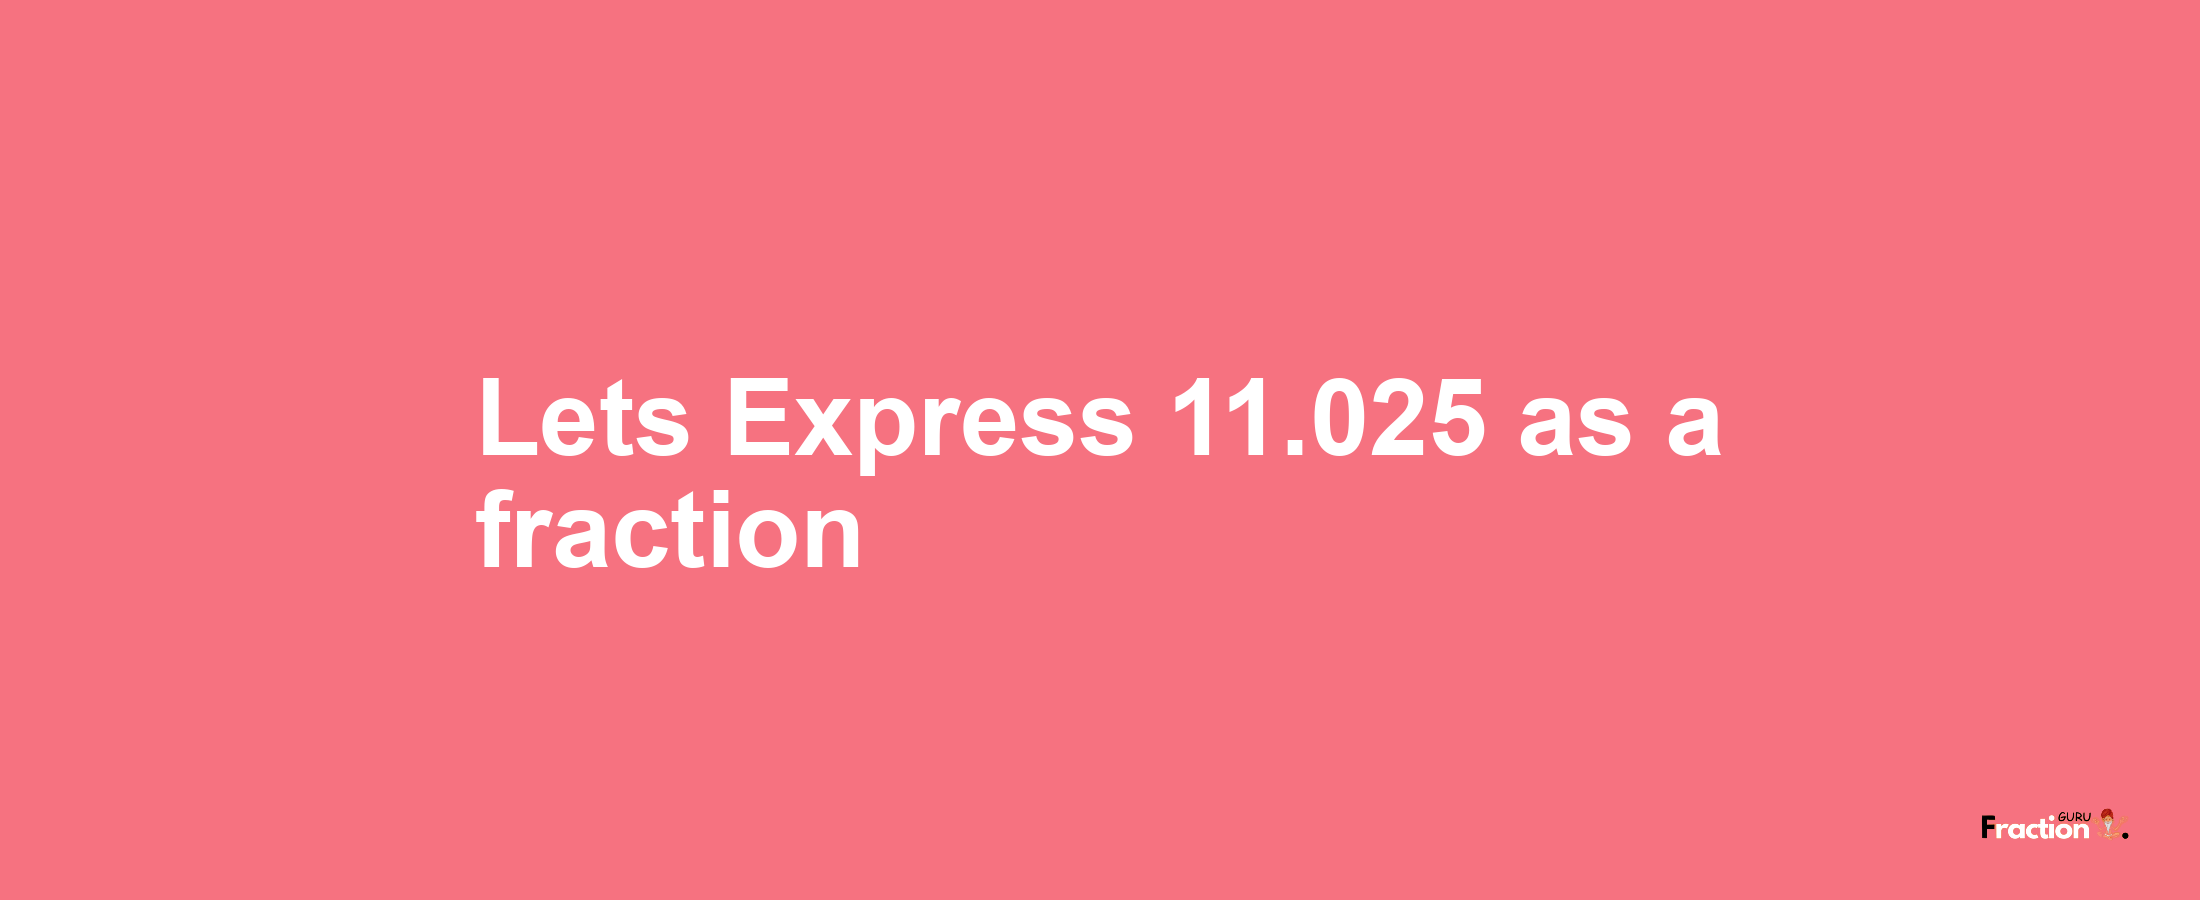 Lets Express 11.025 as afraction